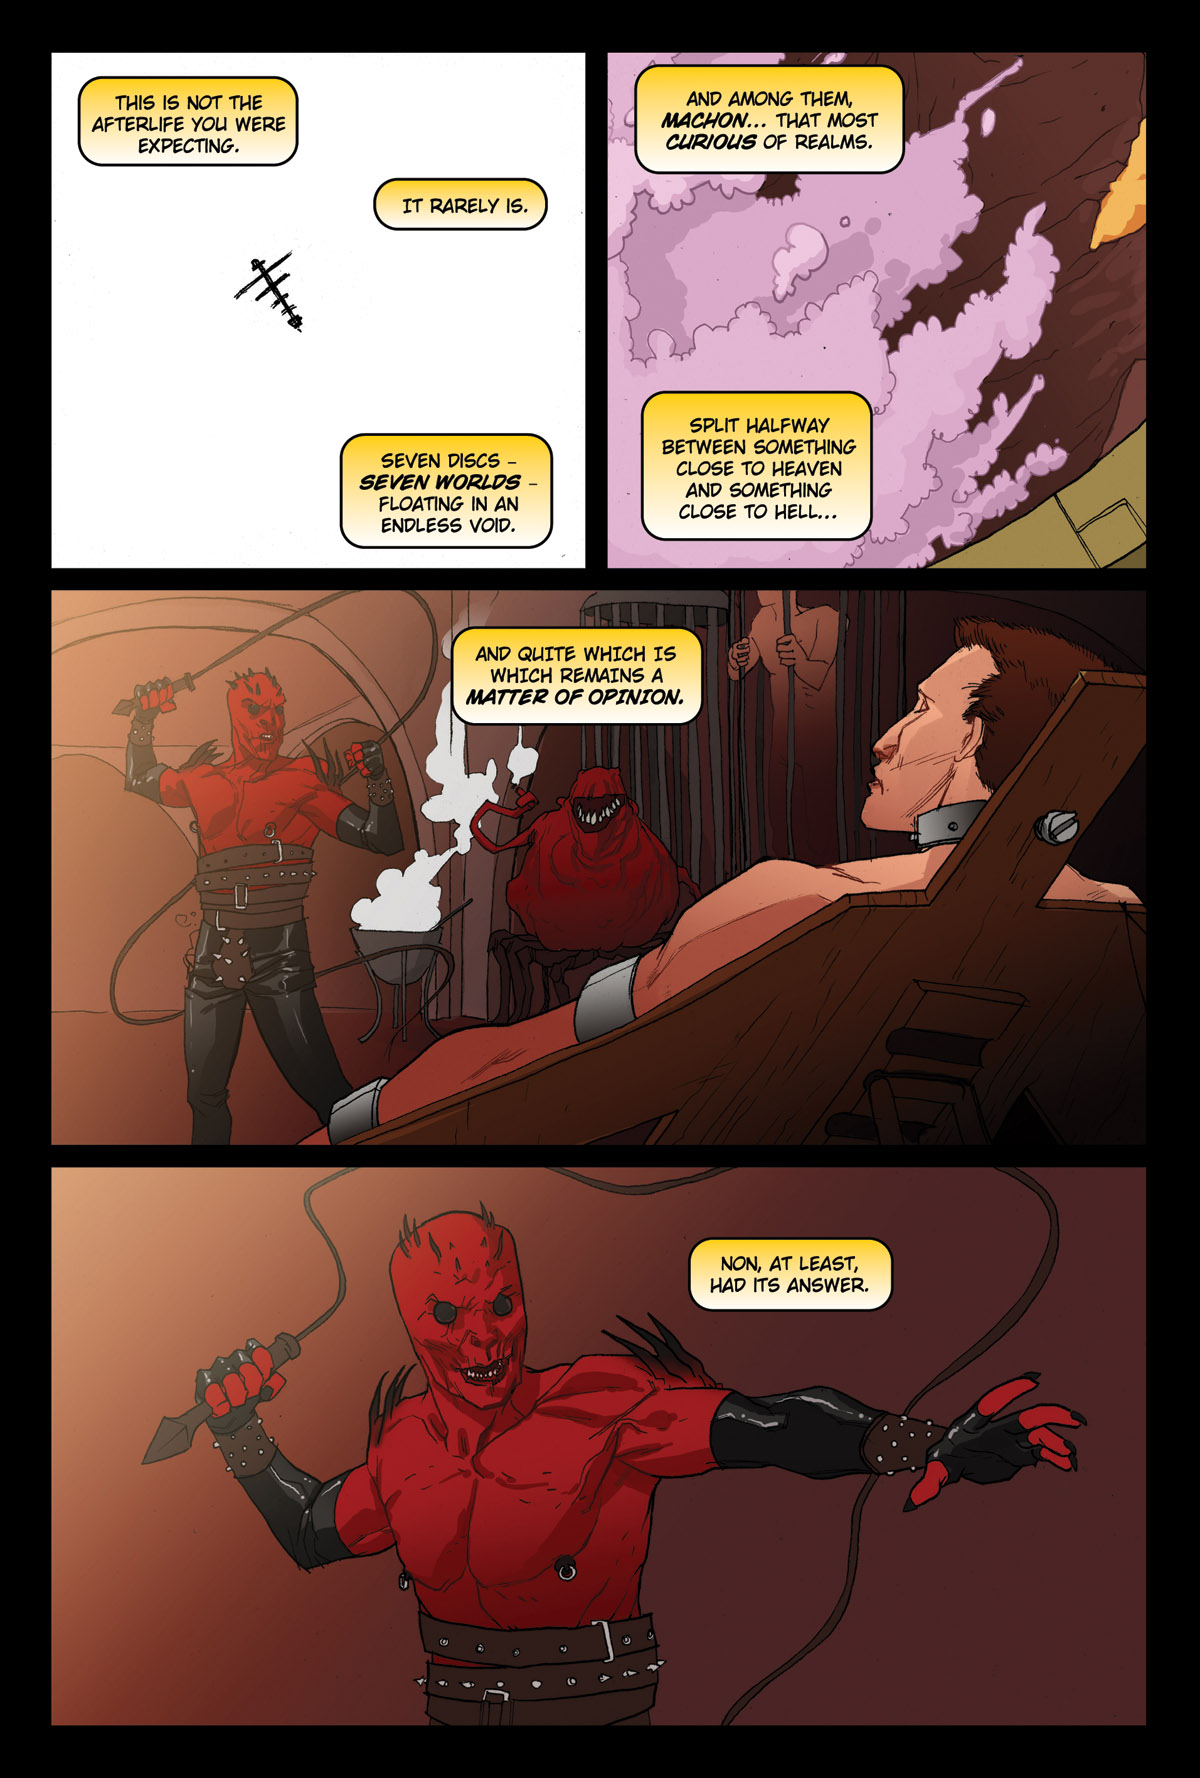 Afterlife Inc. | On High | Page 10